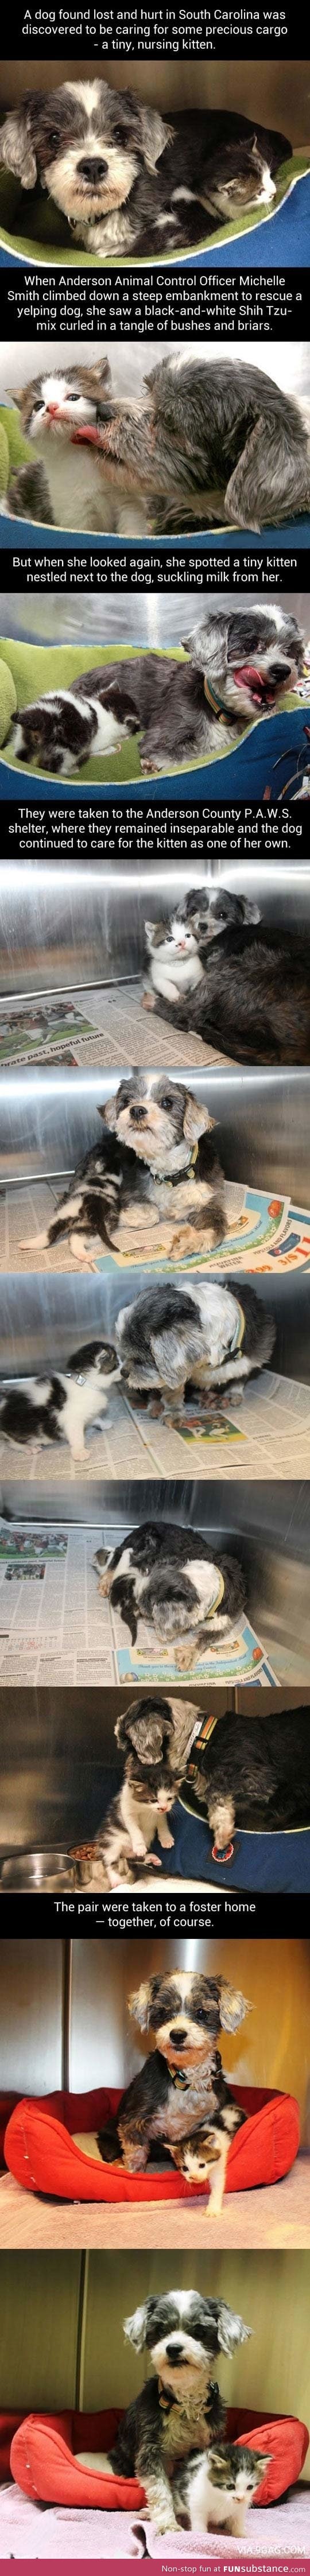 Lost dog finds little kitten and saves her